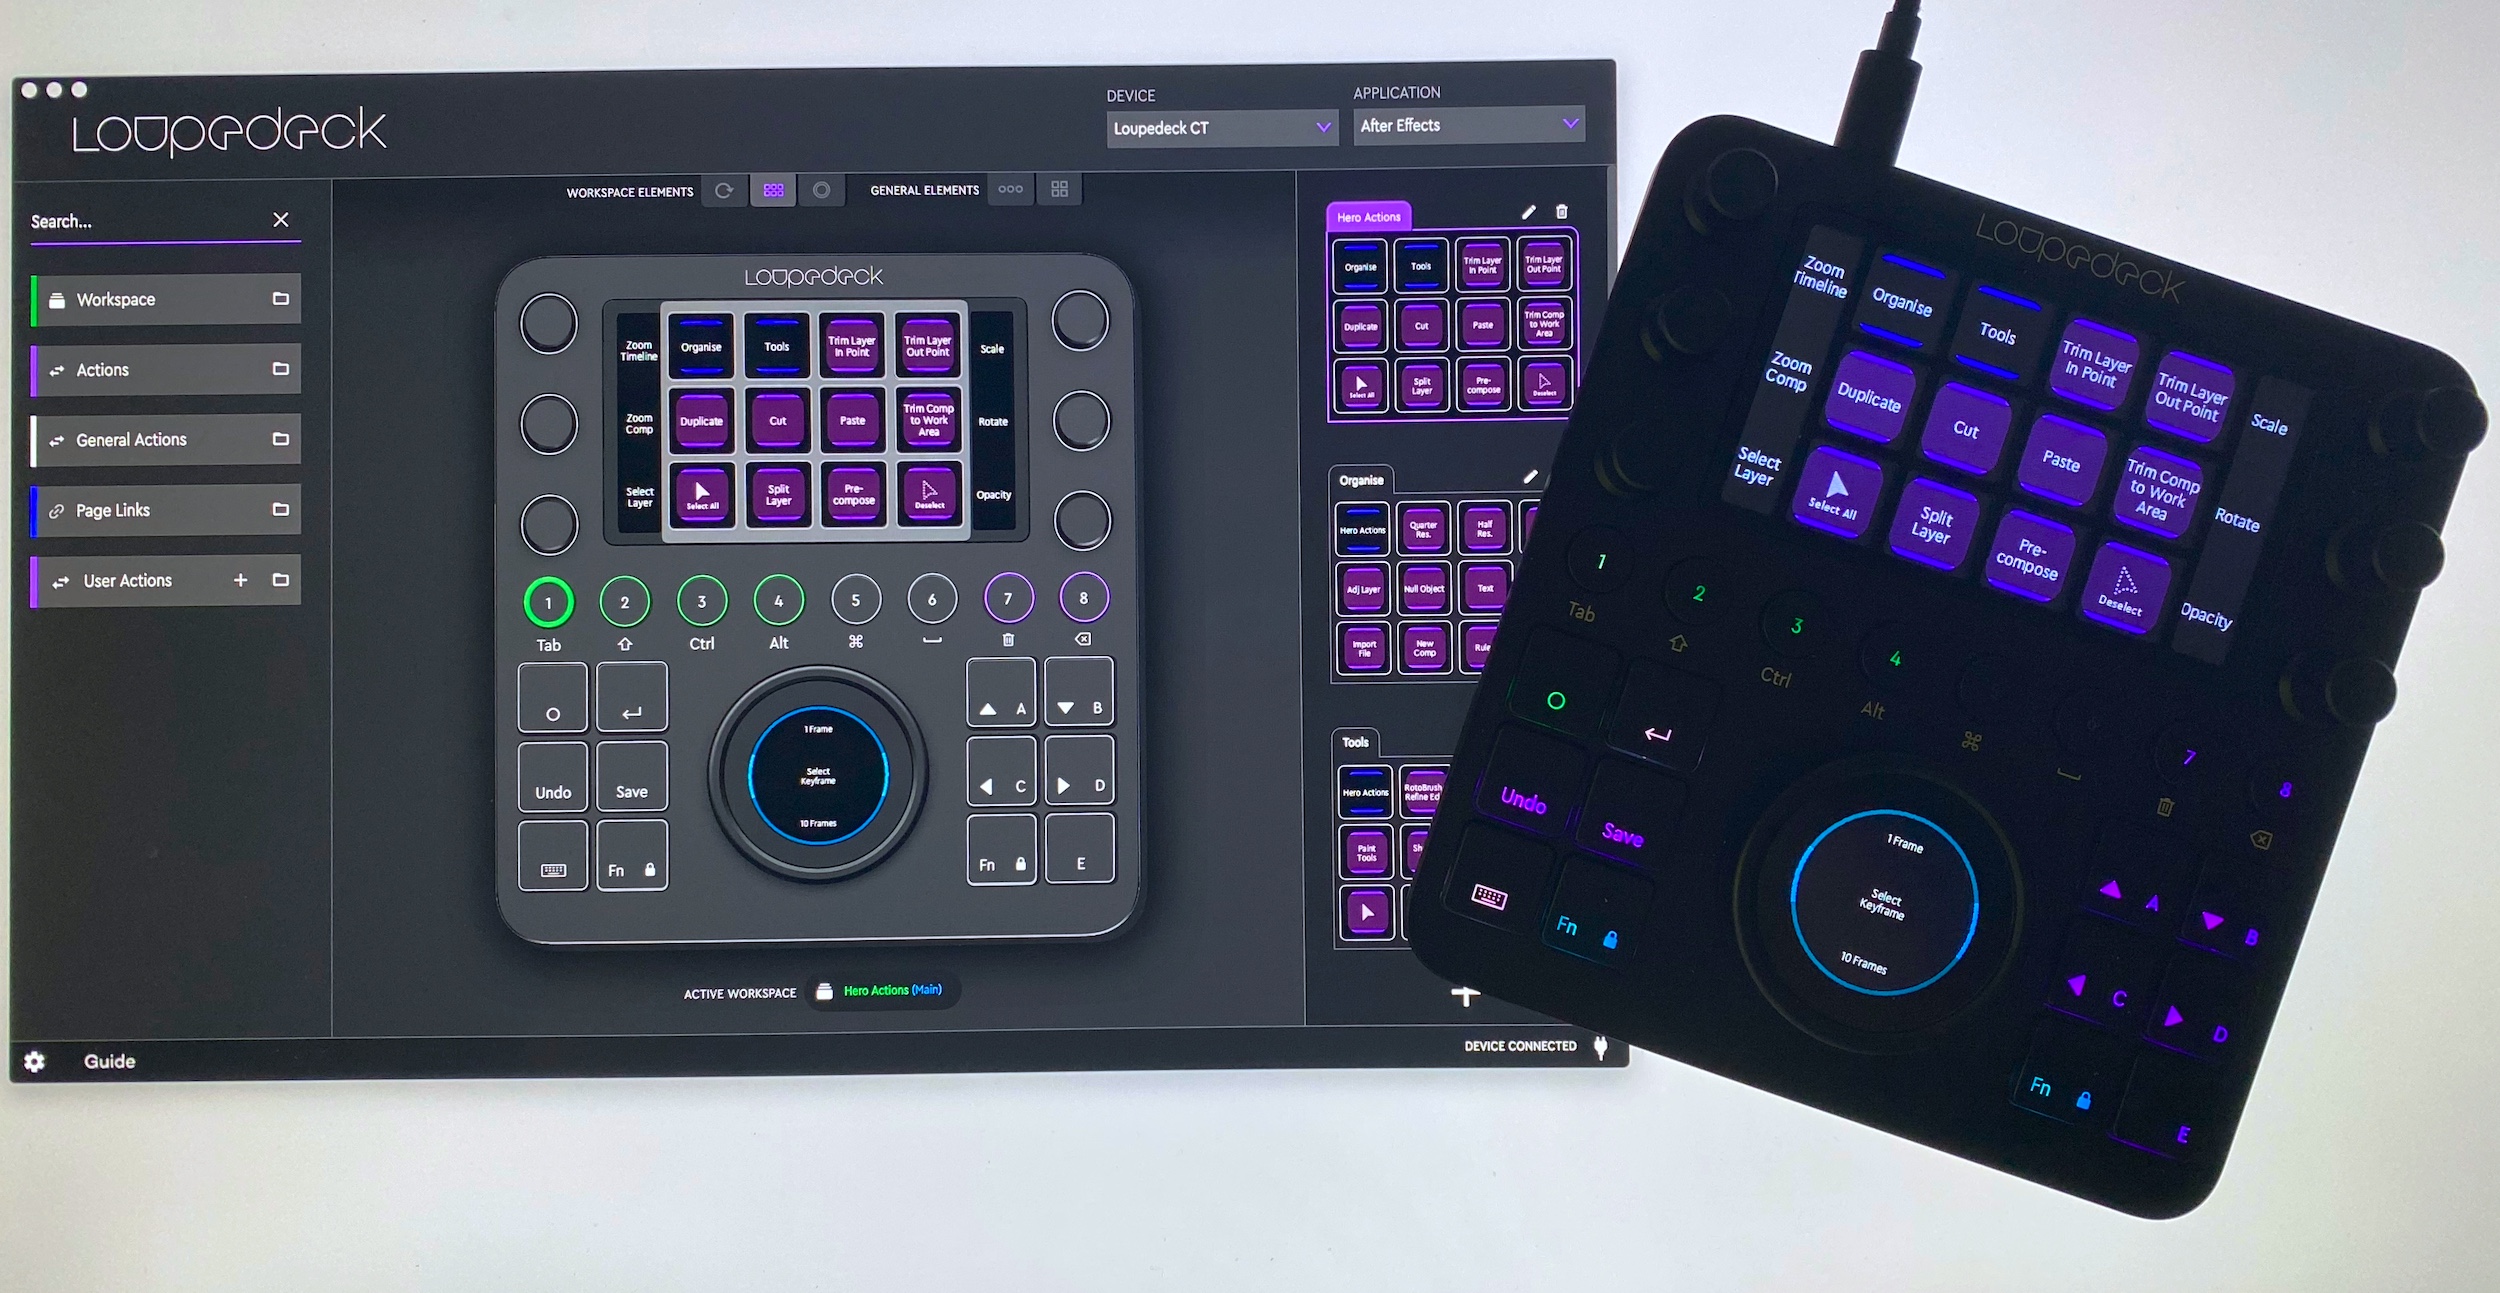 Loupedeck Live has great potential to speed up workflows